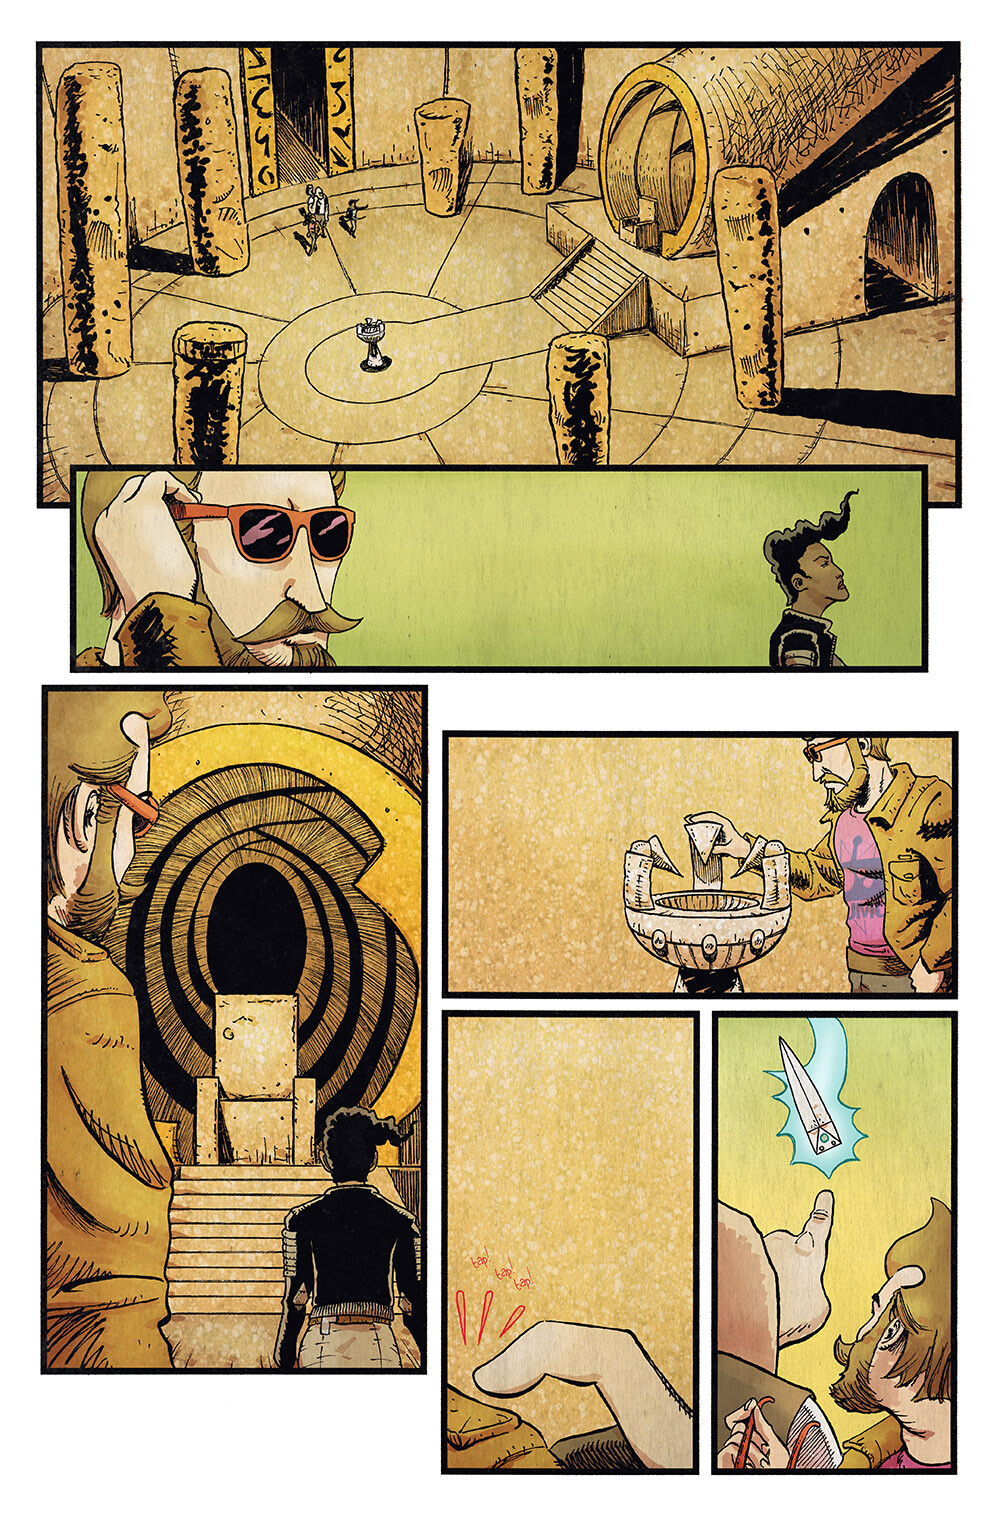 Vagrant Queen: A Planet Called Doom #5 pg 18